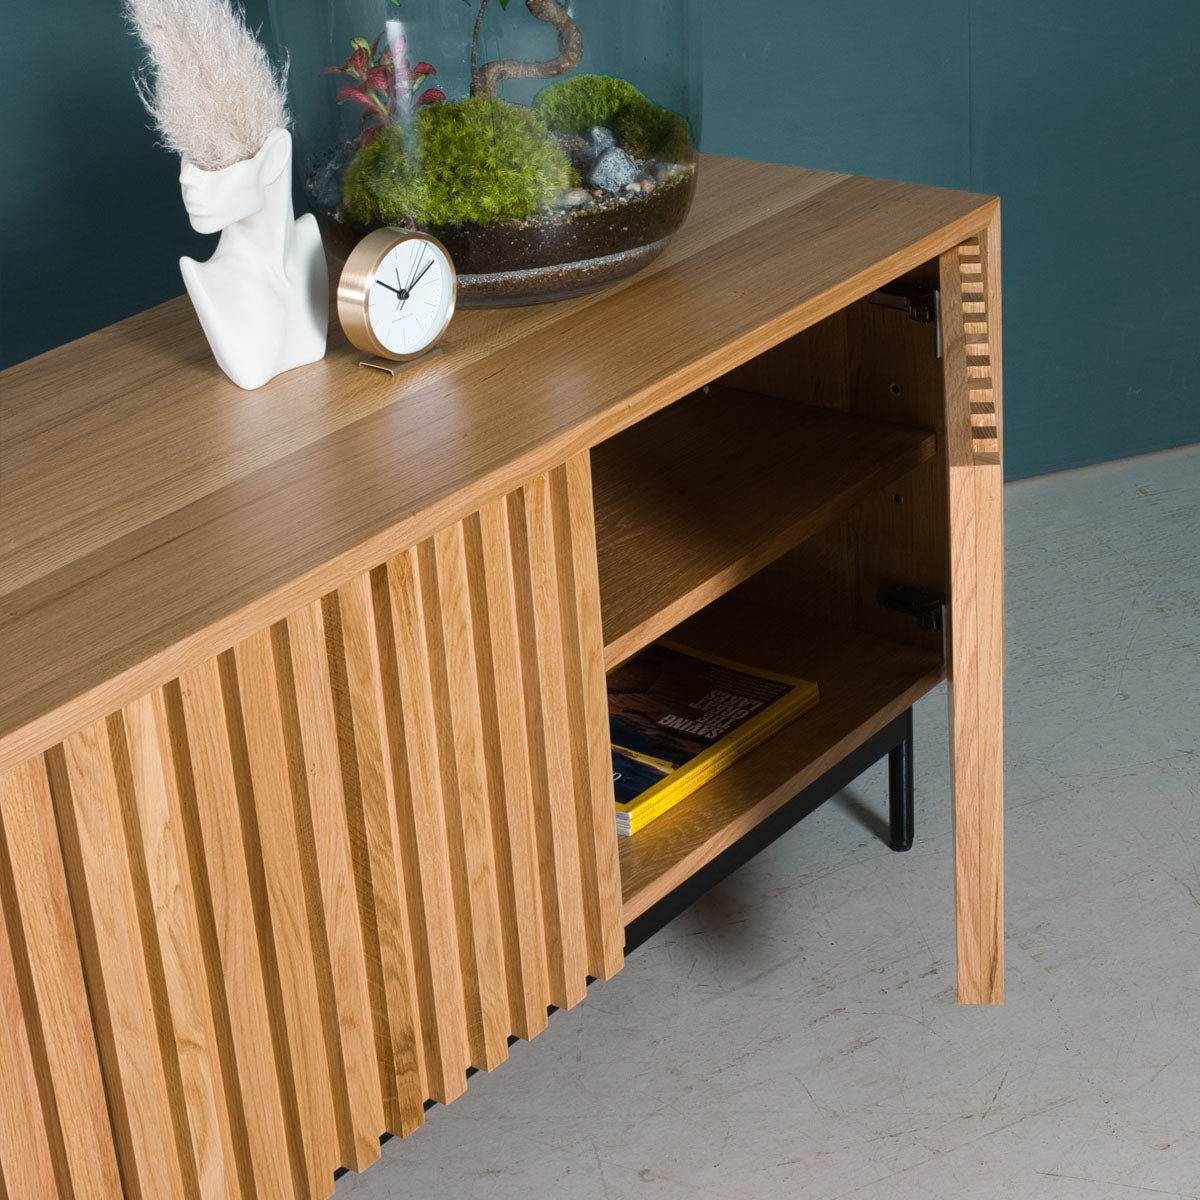 An image of the Fluted Oak Cabinet product available from Koda Studios